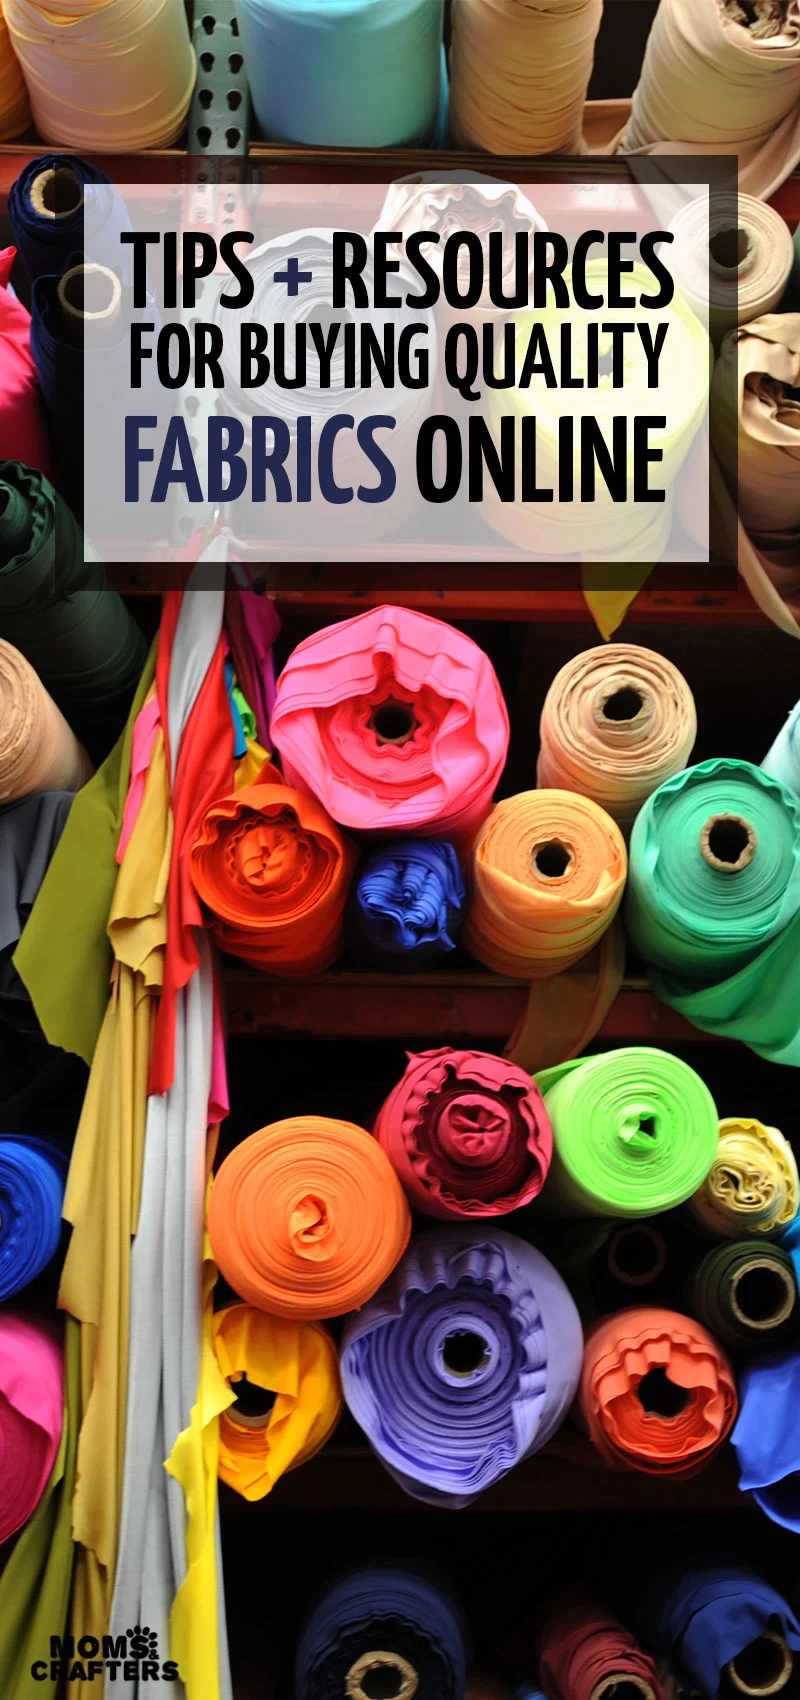 Looking to buy fabric online? This list includes tips for buying fabric online - things you should know before you do it, as well as the best place to buy fabrics online depending on which project you're working on - fashion, interior design, or even quilting #quilting #sewing #fabric